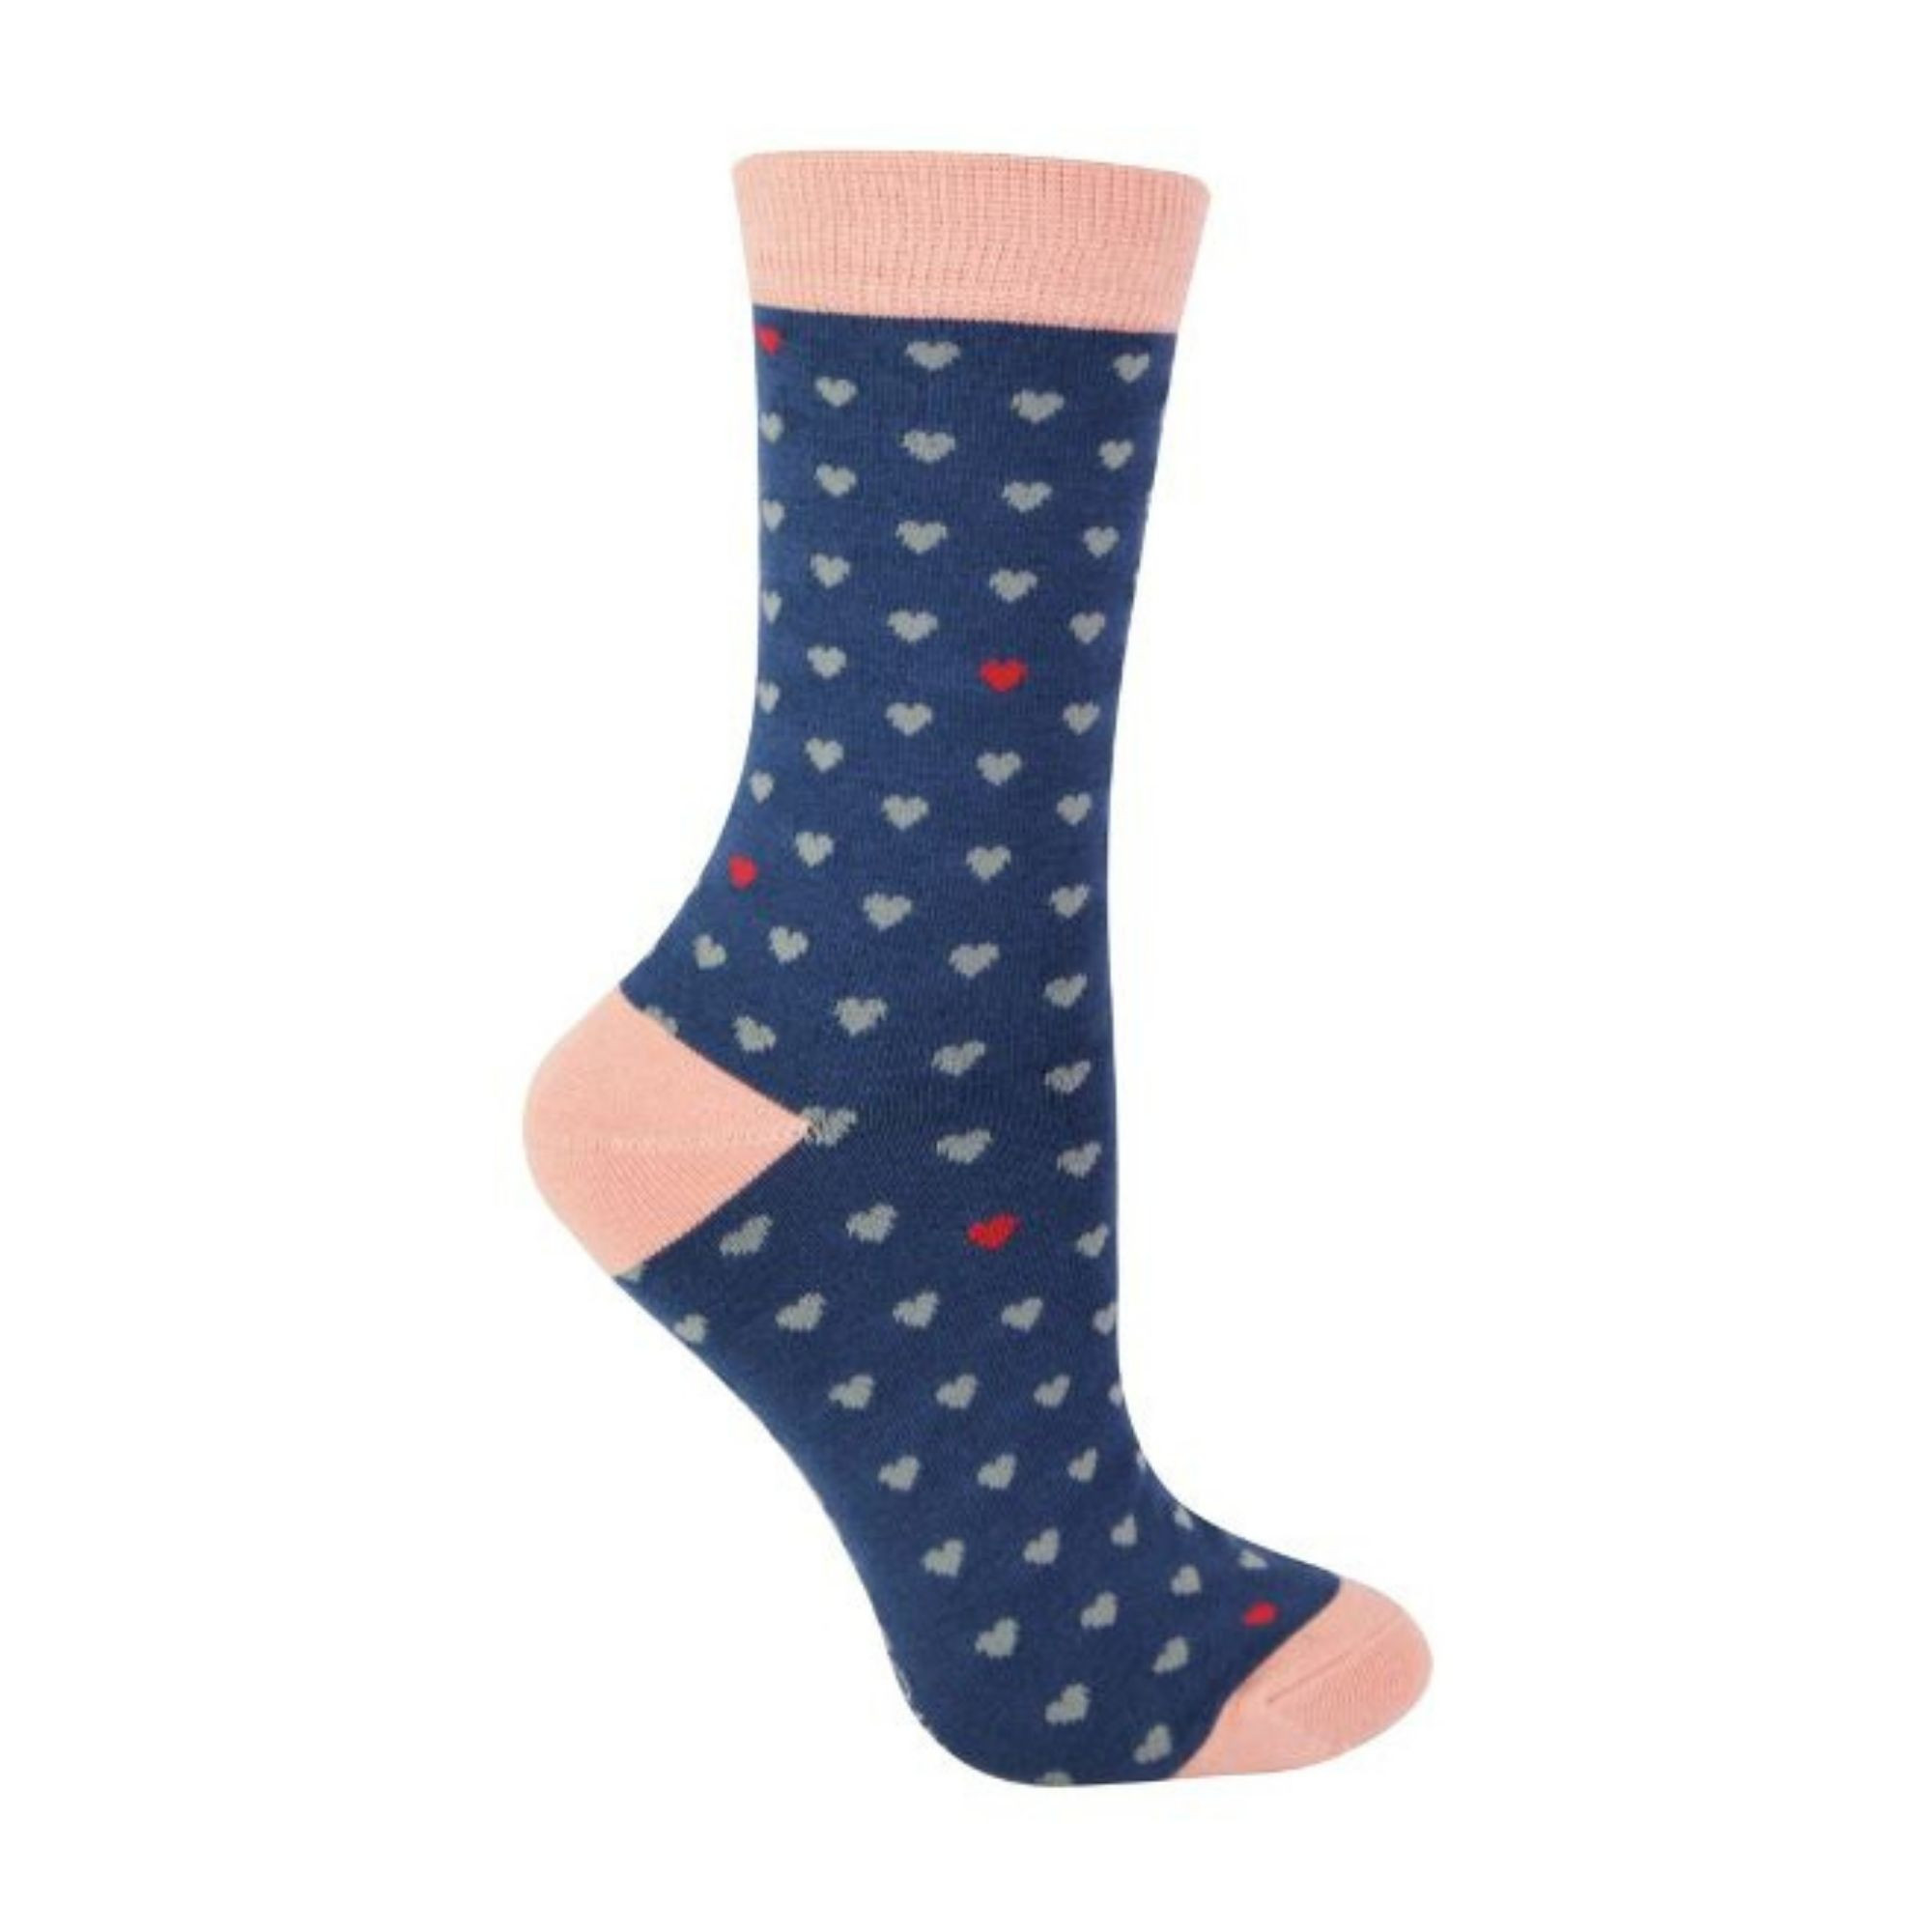 Ladies Socks with Hearts on Them | Valentines Day Gift for Girlfriend